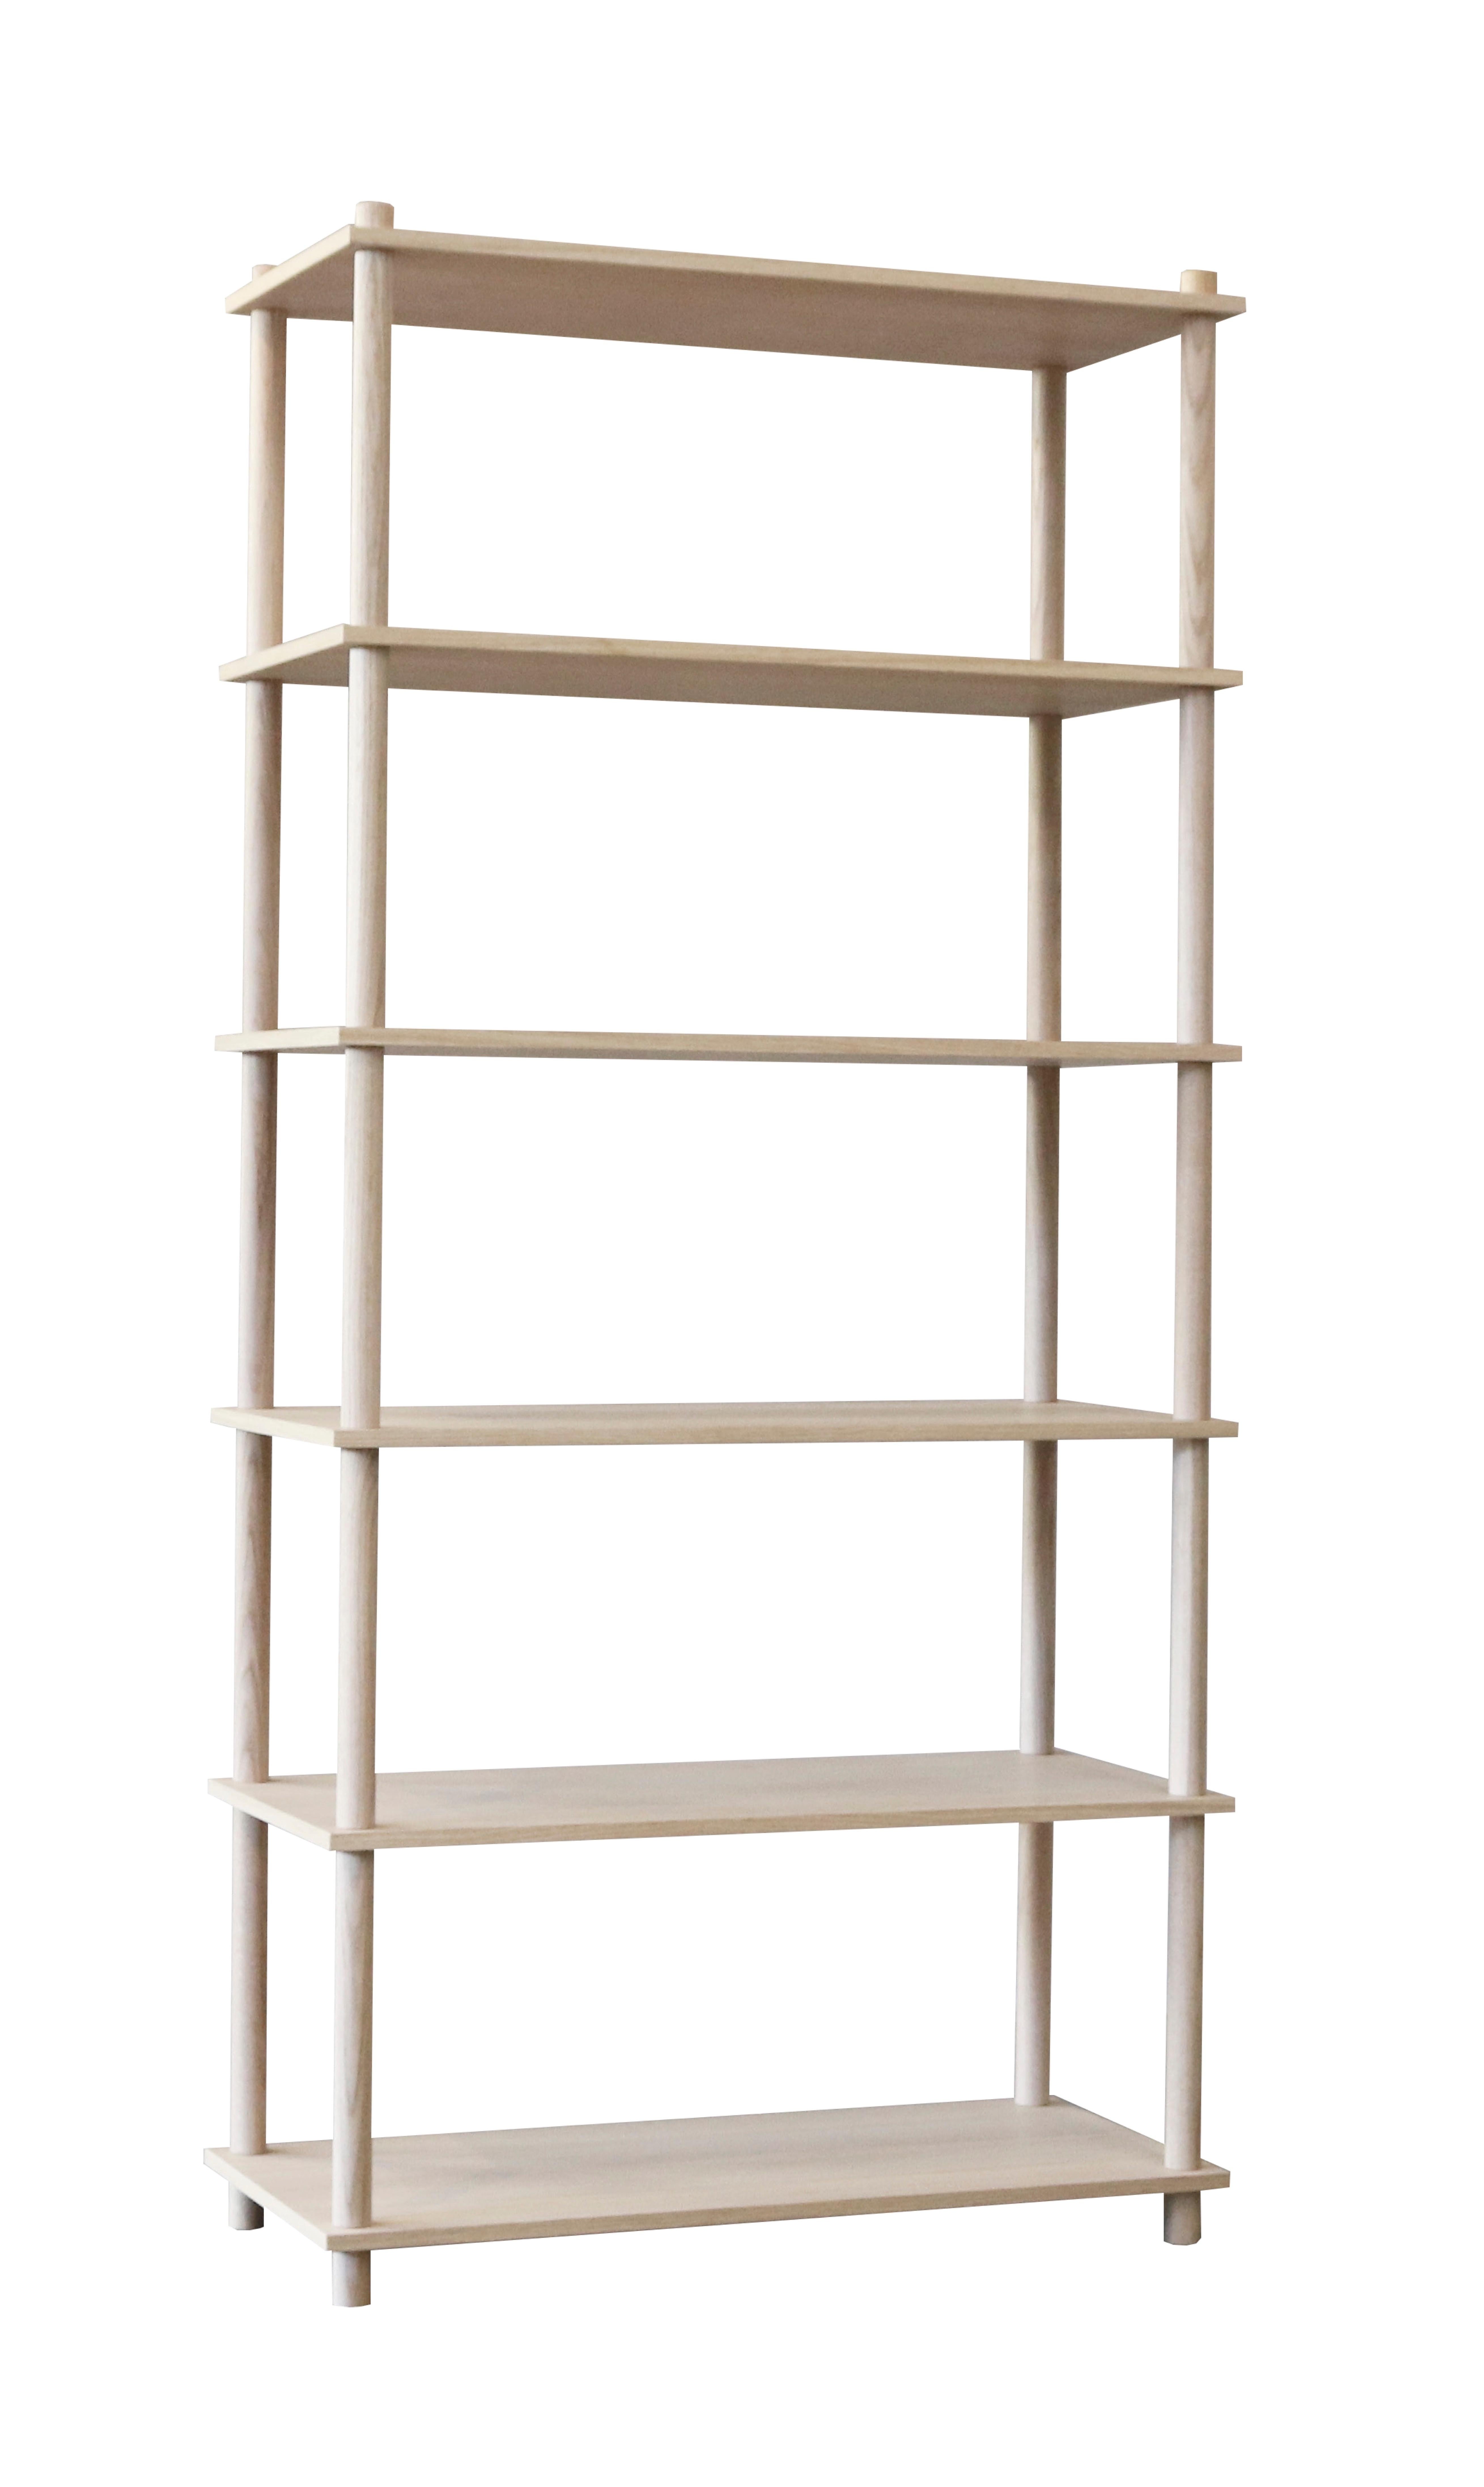 Oak elevate shelving V by Camilla Akersveen and Christopher Konings
Materials: metal, oak.
Dimensions: D 40 x W 86.8 x H 182.6 cm
Available in matt lacquered oak or black oak. Different shelving systems available.

Camilla Akersveen and